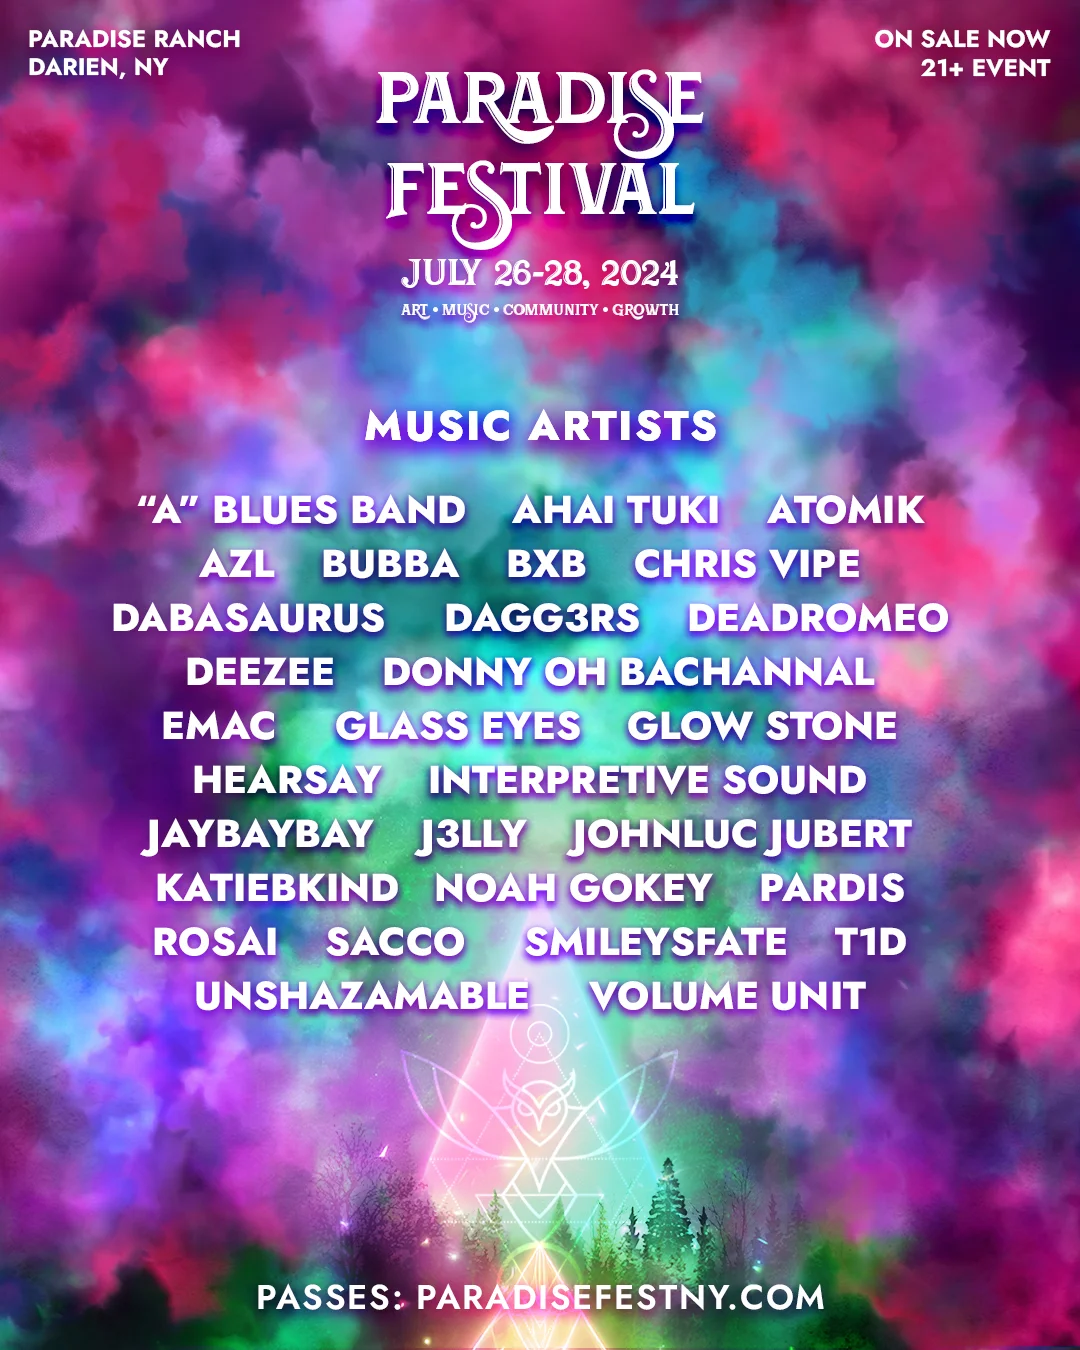 View the Paradise Festival 2024 Music Lineup Image